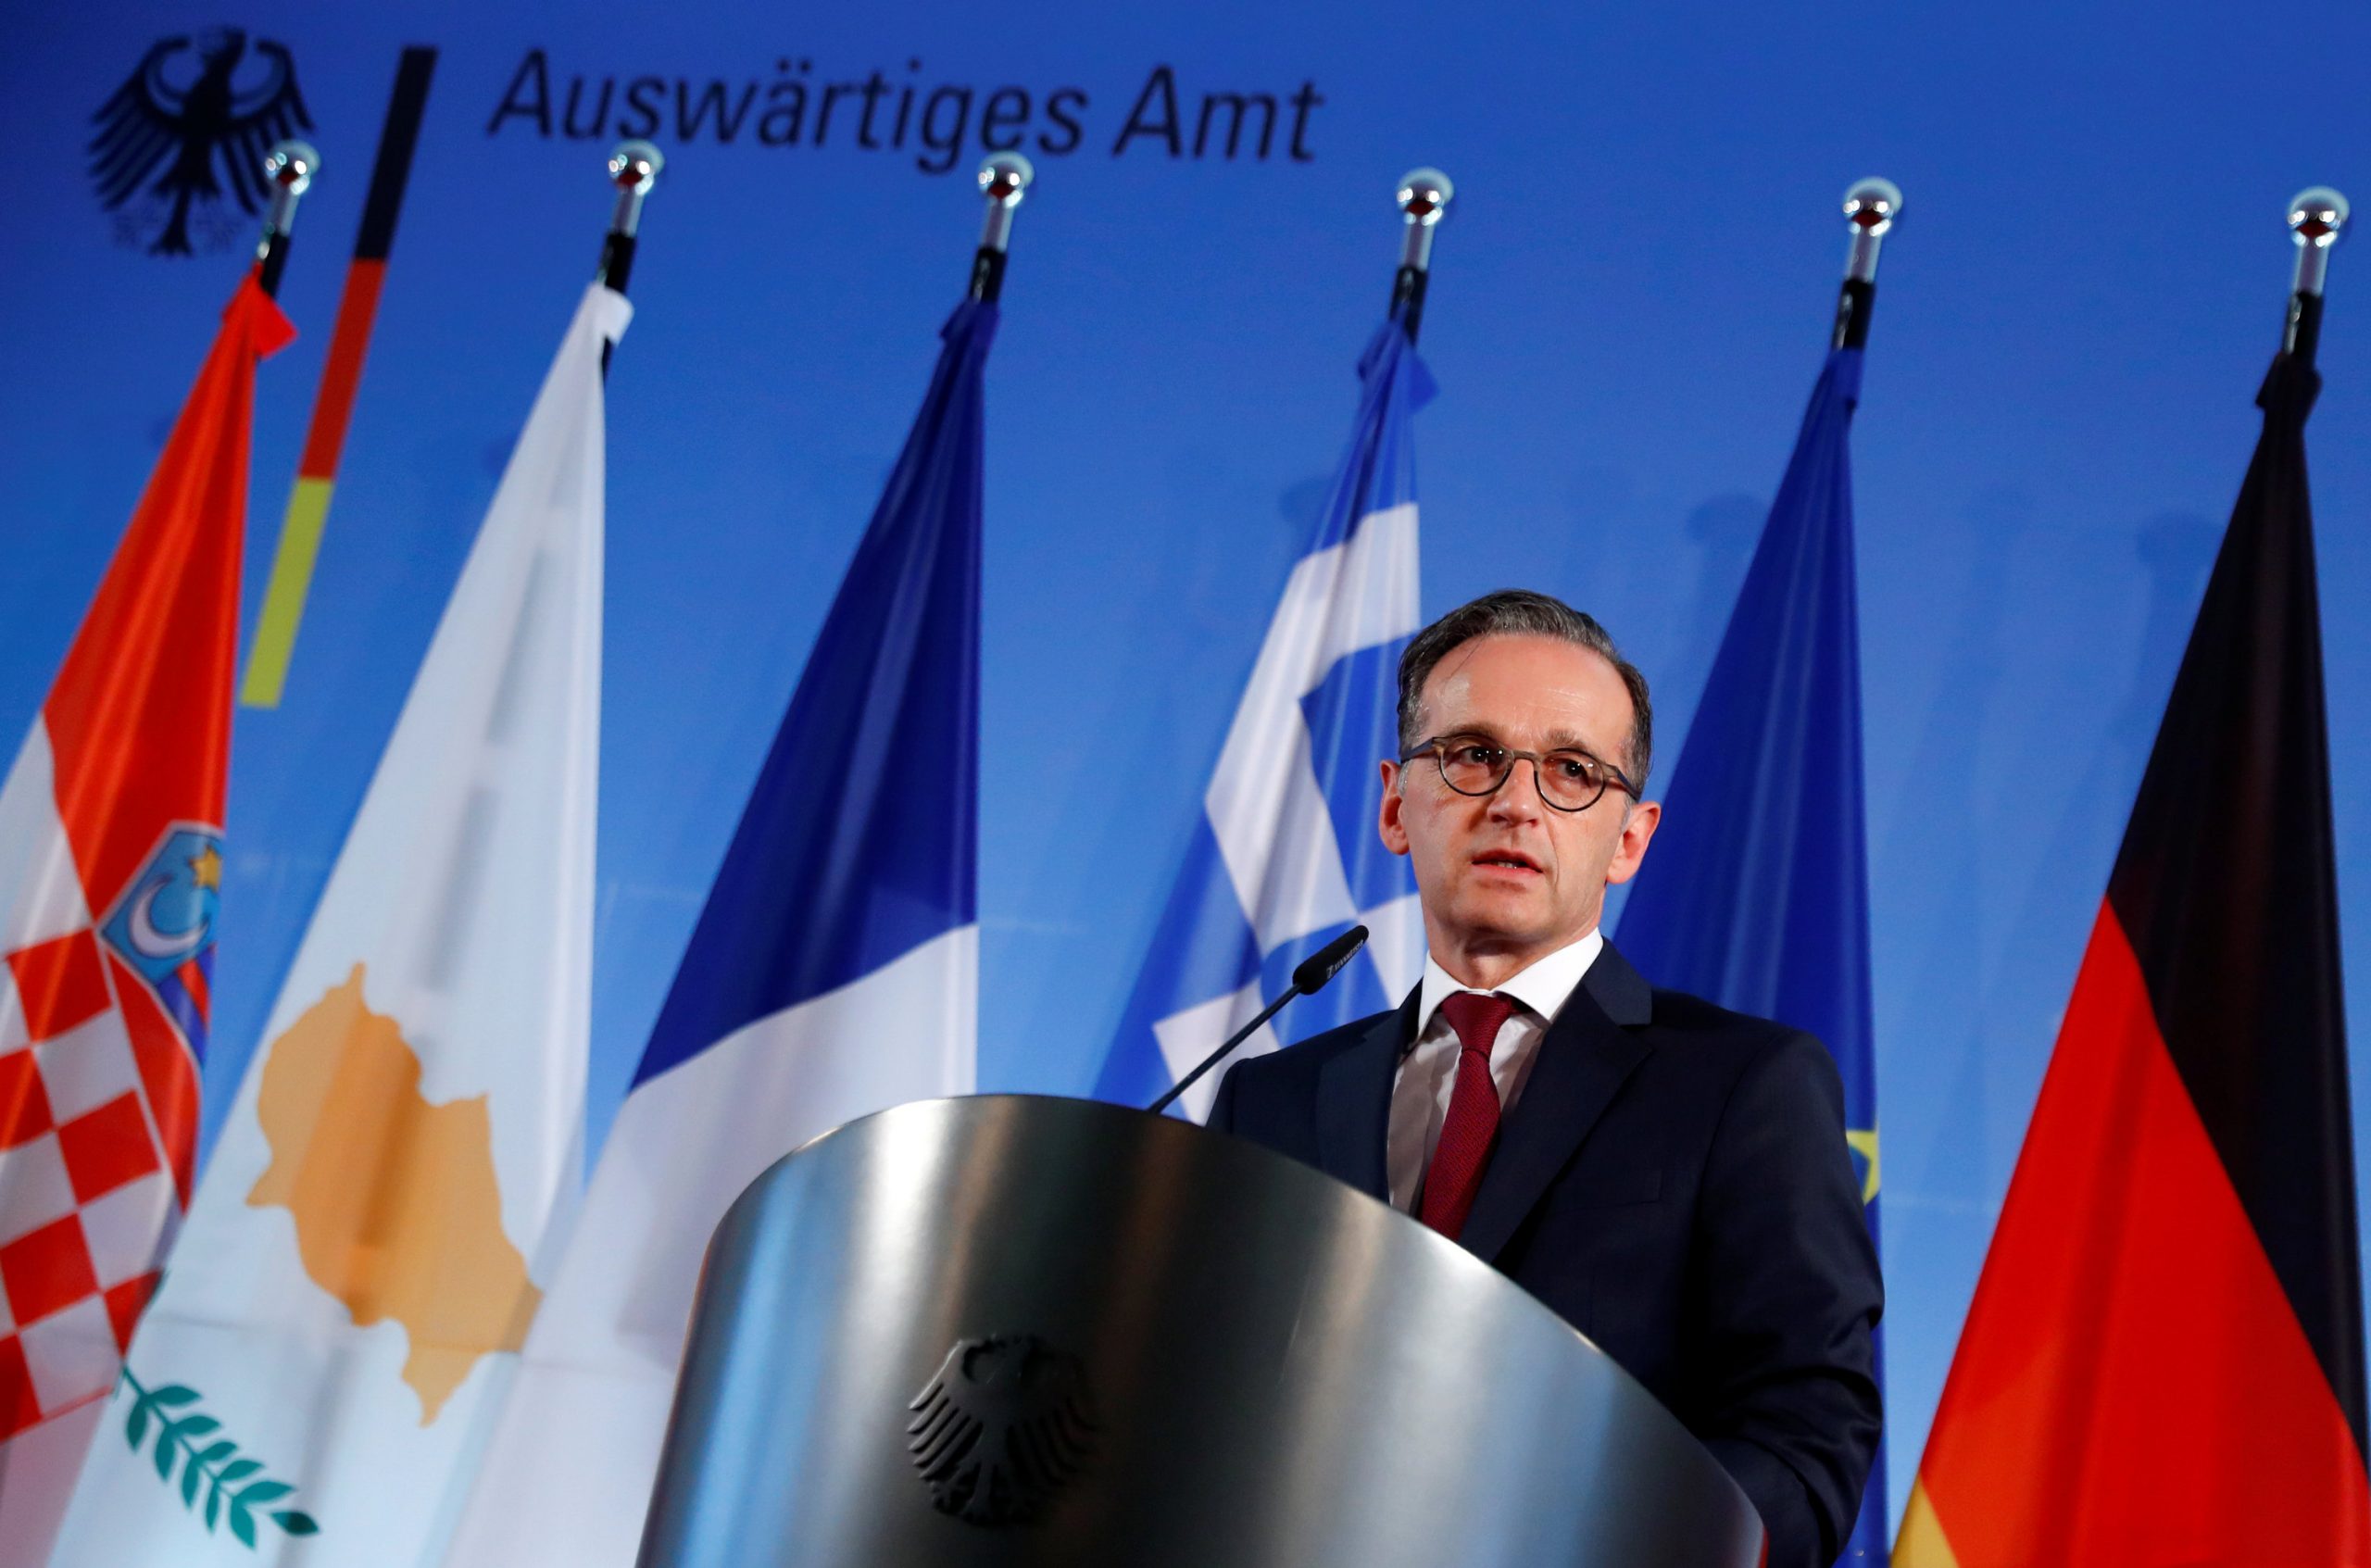 11 June 2020, Berlin: German Foreign Minister Heiko Maas speaks at a press conference on the current status of travel warnings and restrictions in connection with the coronavirus pandemic. Photo: Fabrizio Bensch/Reuters Pool/dpa